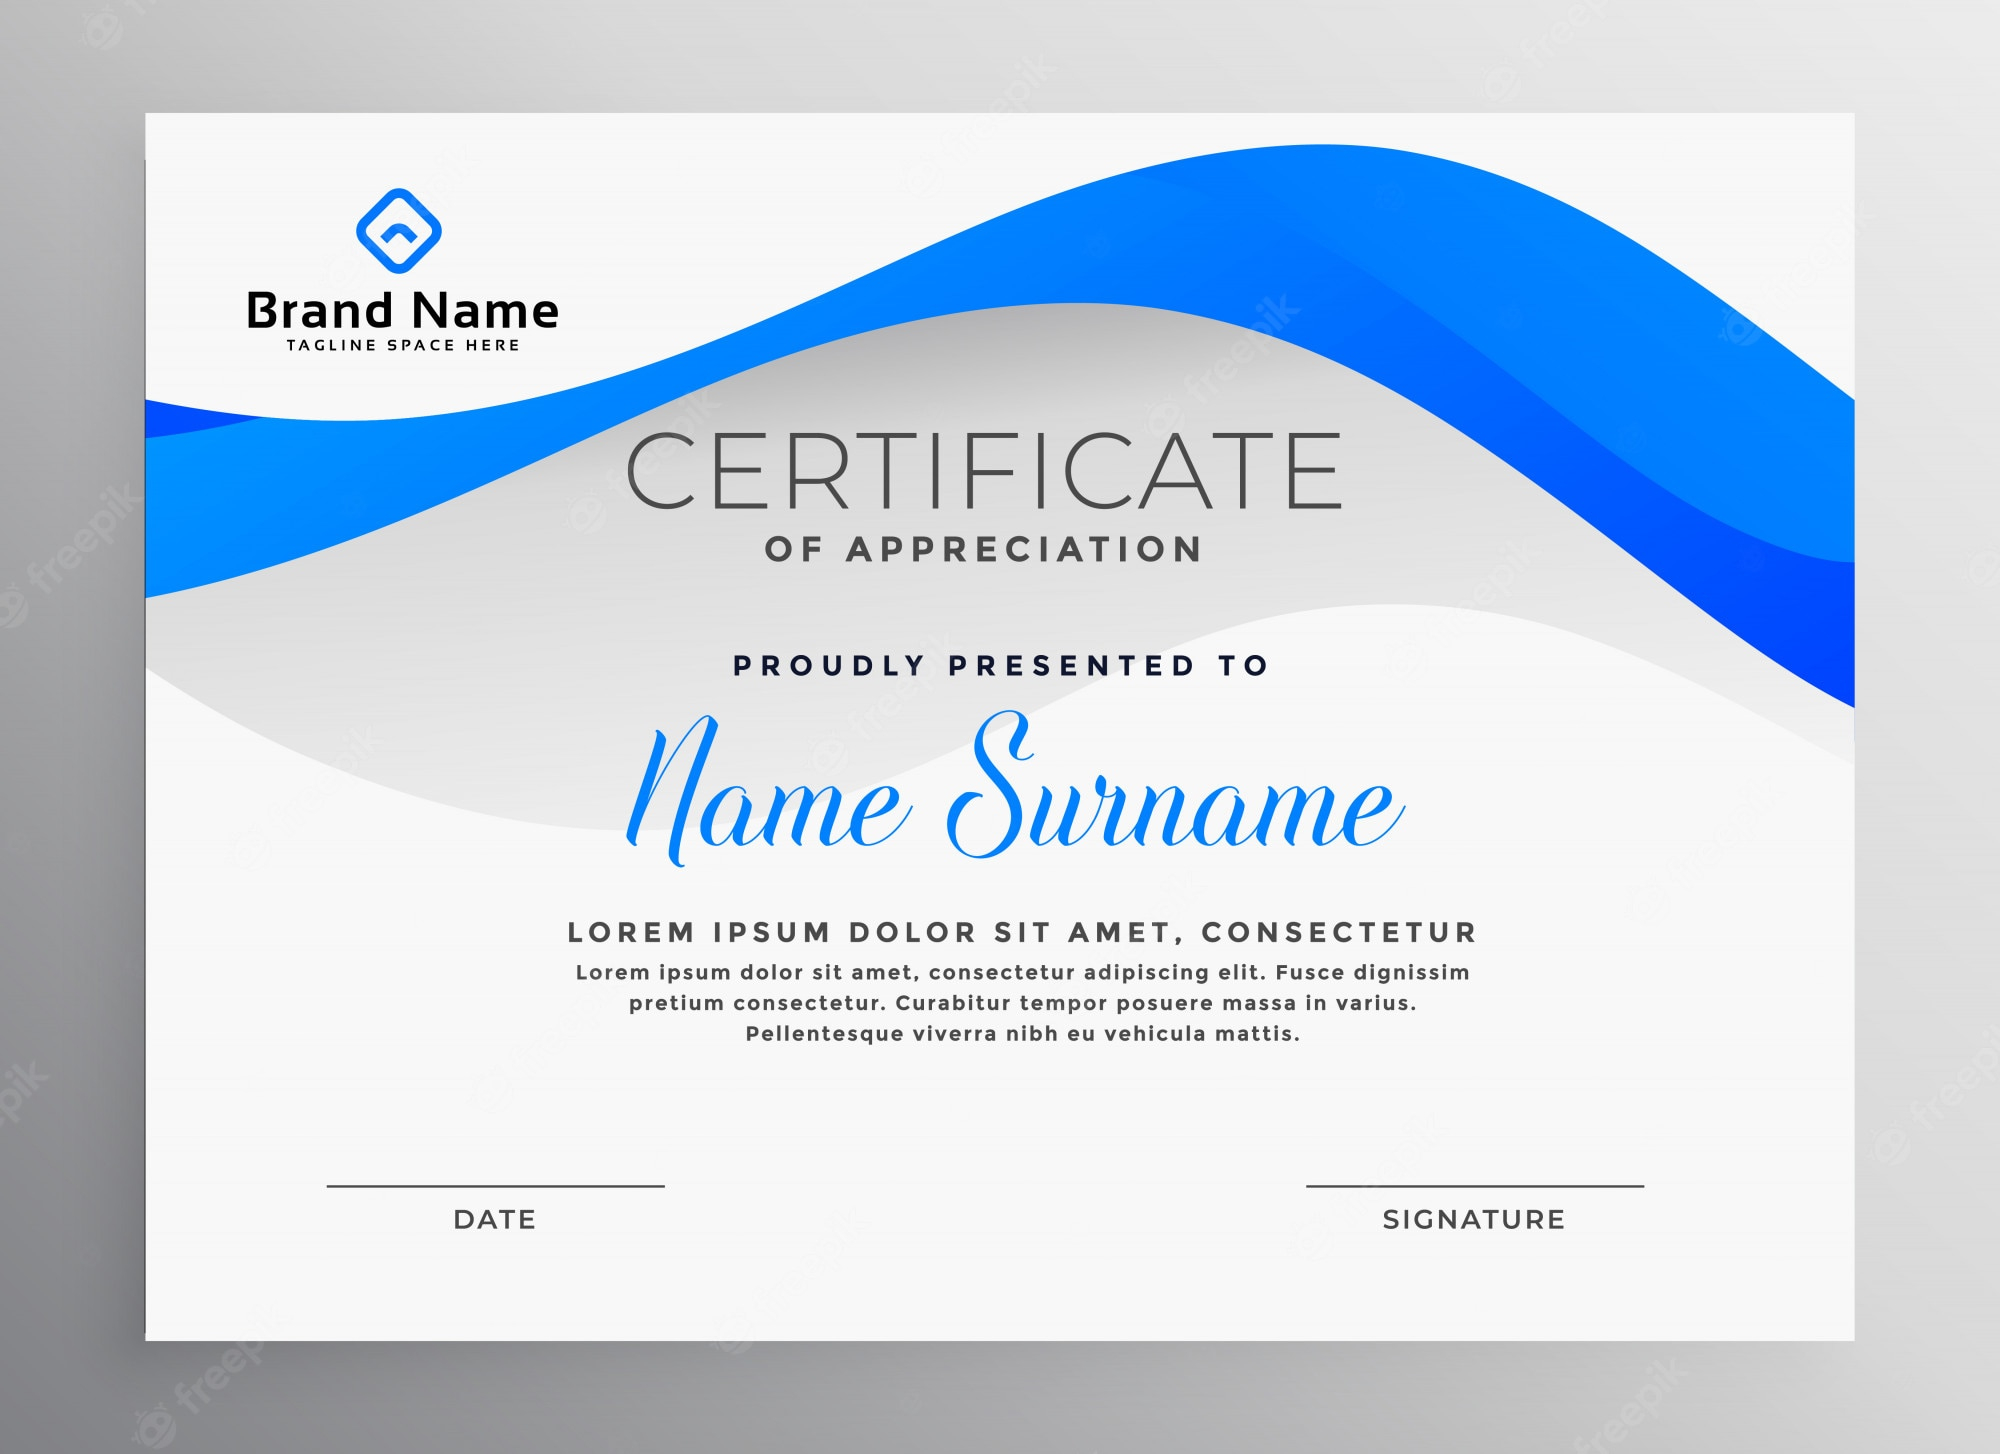 Certificate Images - Free Download on Freepik Pertaining To Blank Certificate Templates Free Download